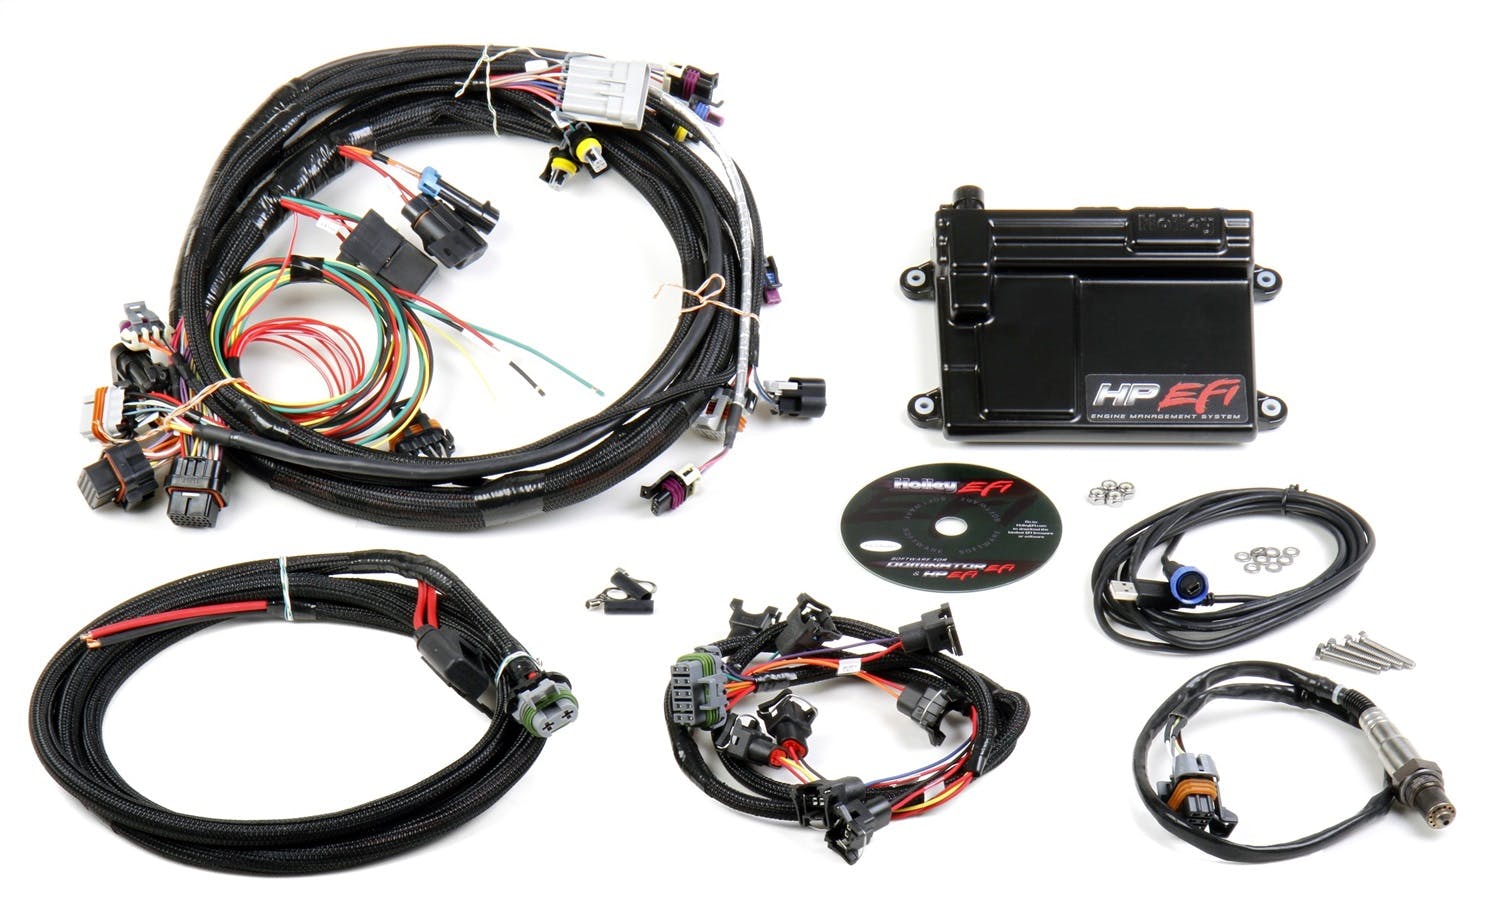 Holley EFI 550-602 HP ECU AND HARNESS LS1 and LS6